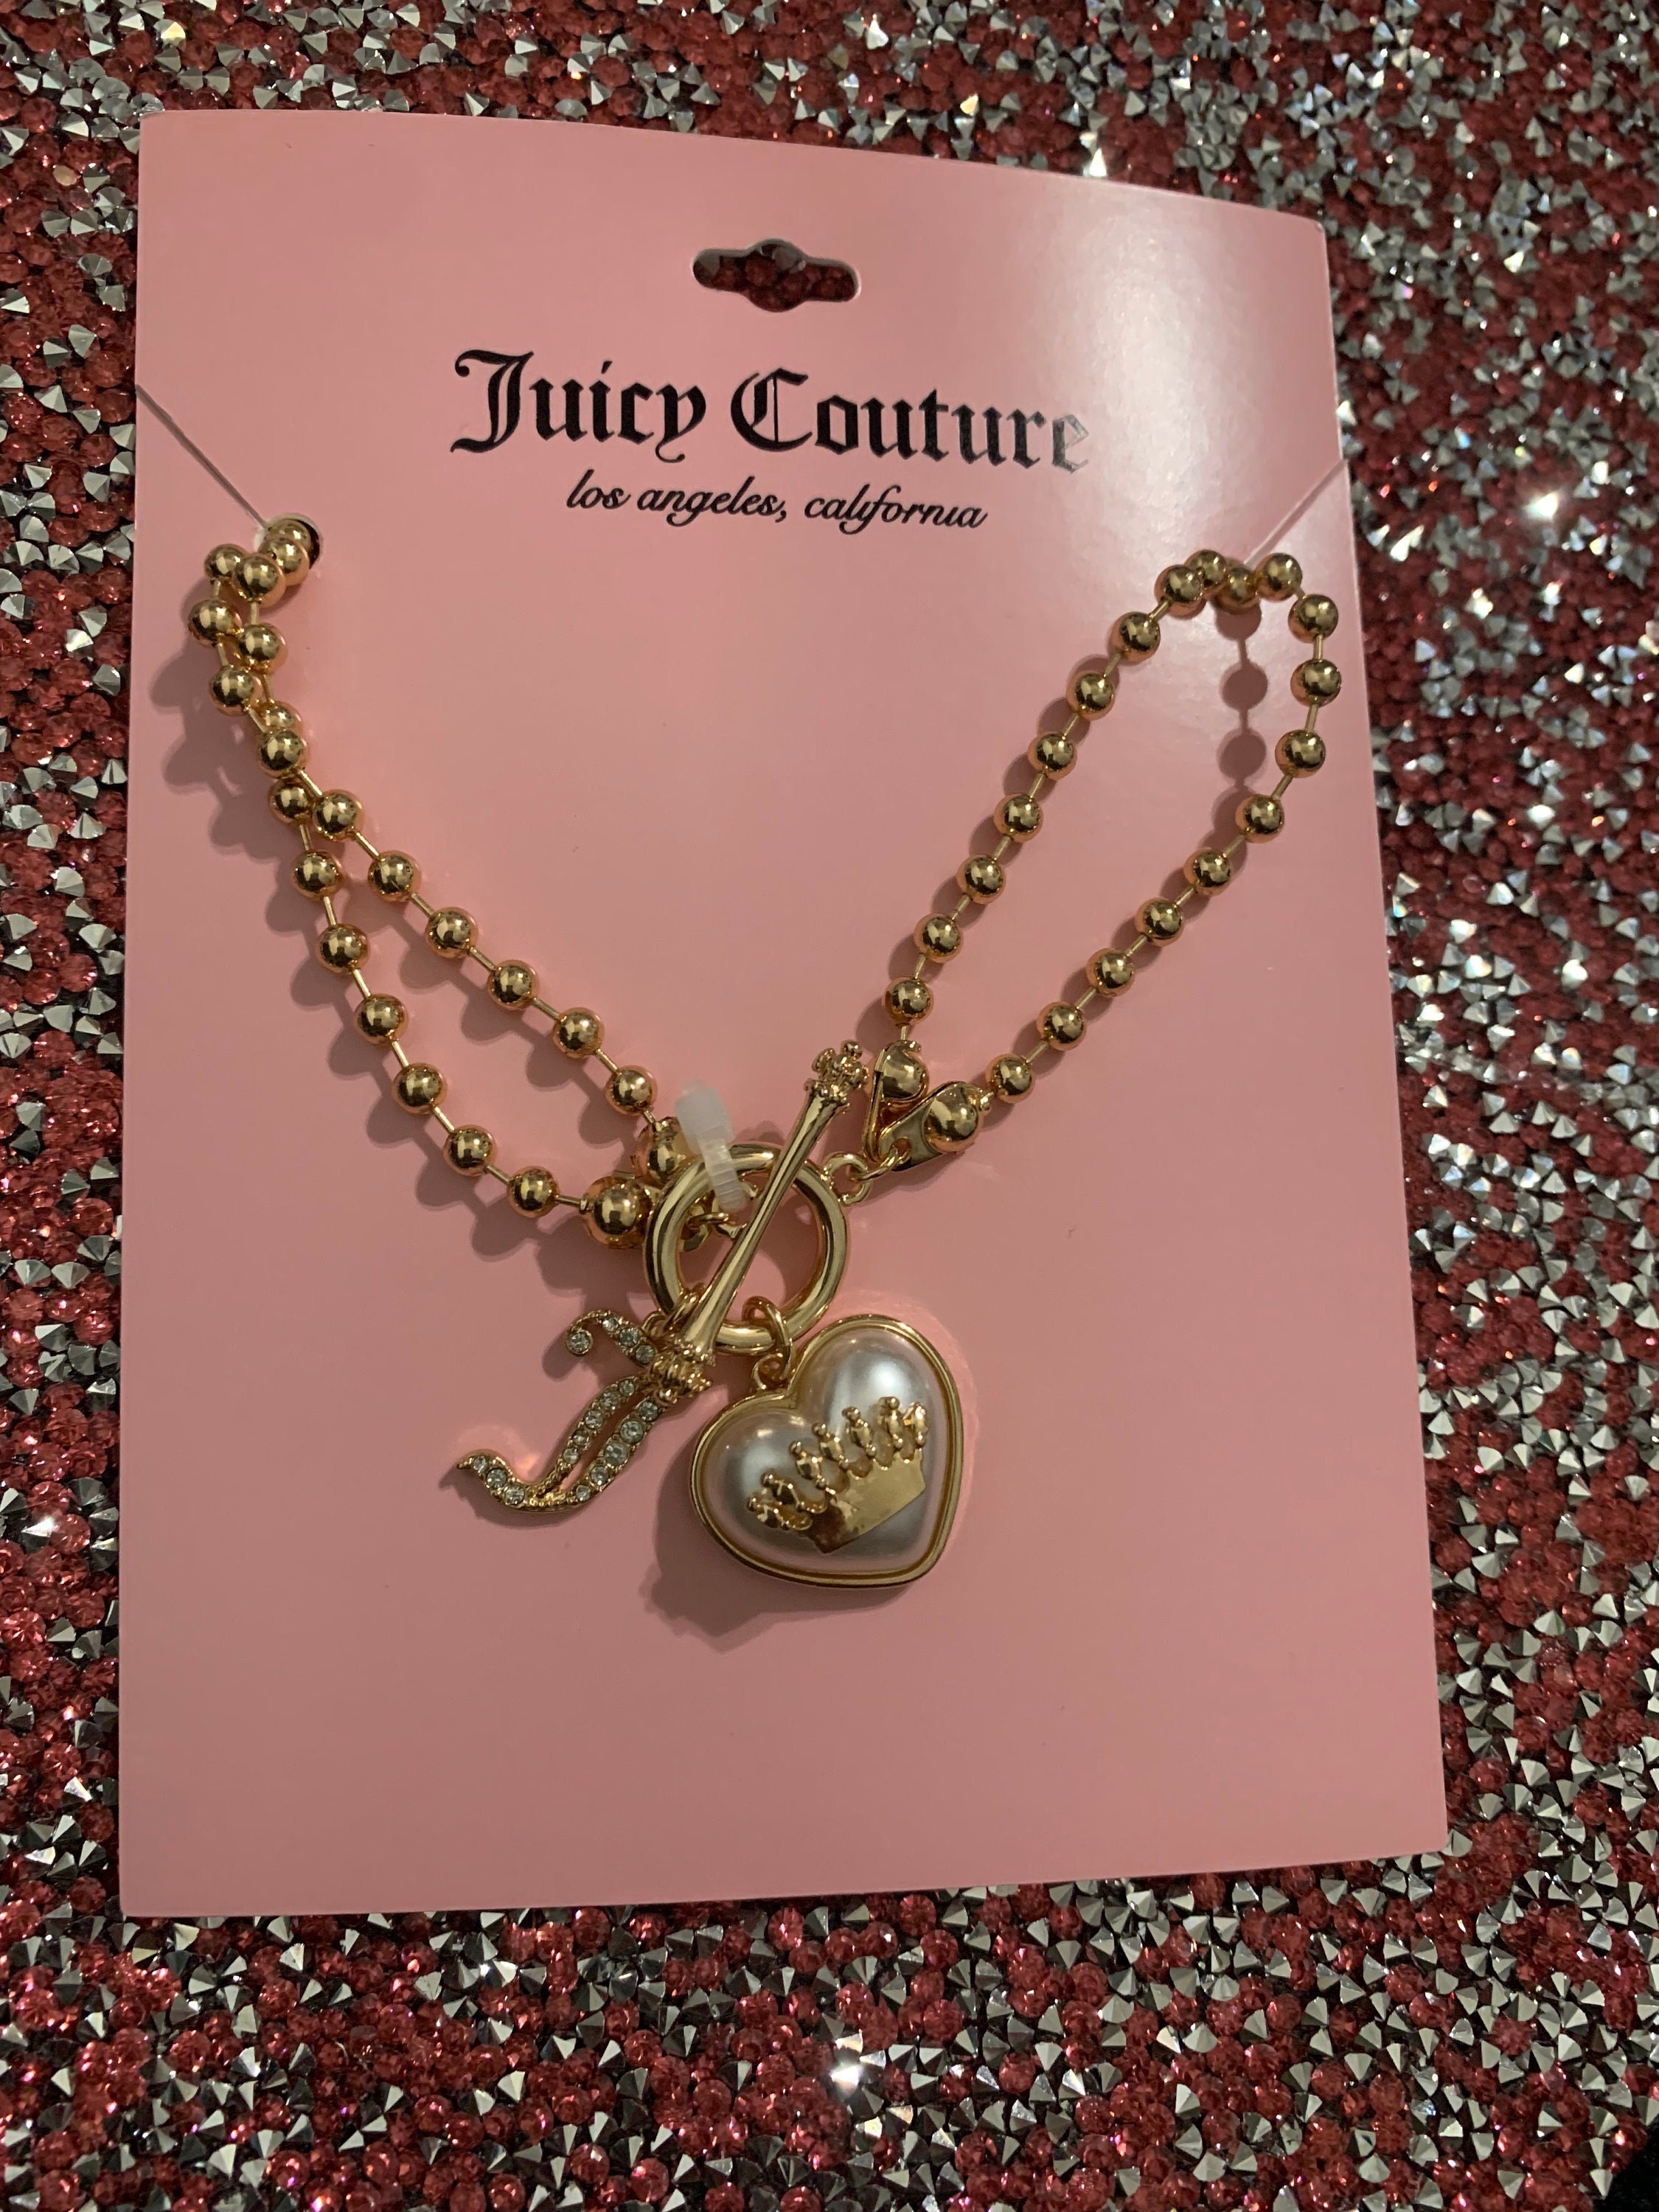 Juicy Couture Official Vintage Jewelry Y2k Inspired Jewelry Designer Jewelry  Trendy Necklace Set Energy Crystal Necklace Gift LGTBQ Pride 